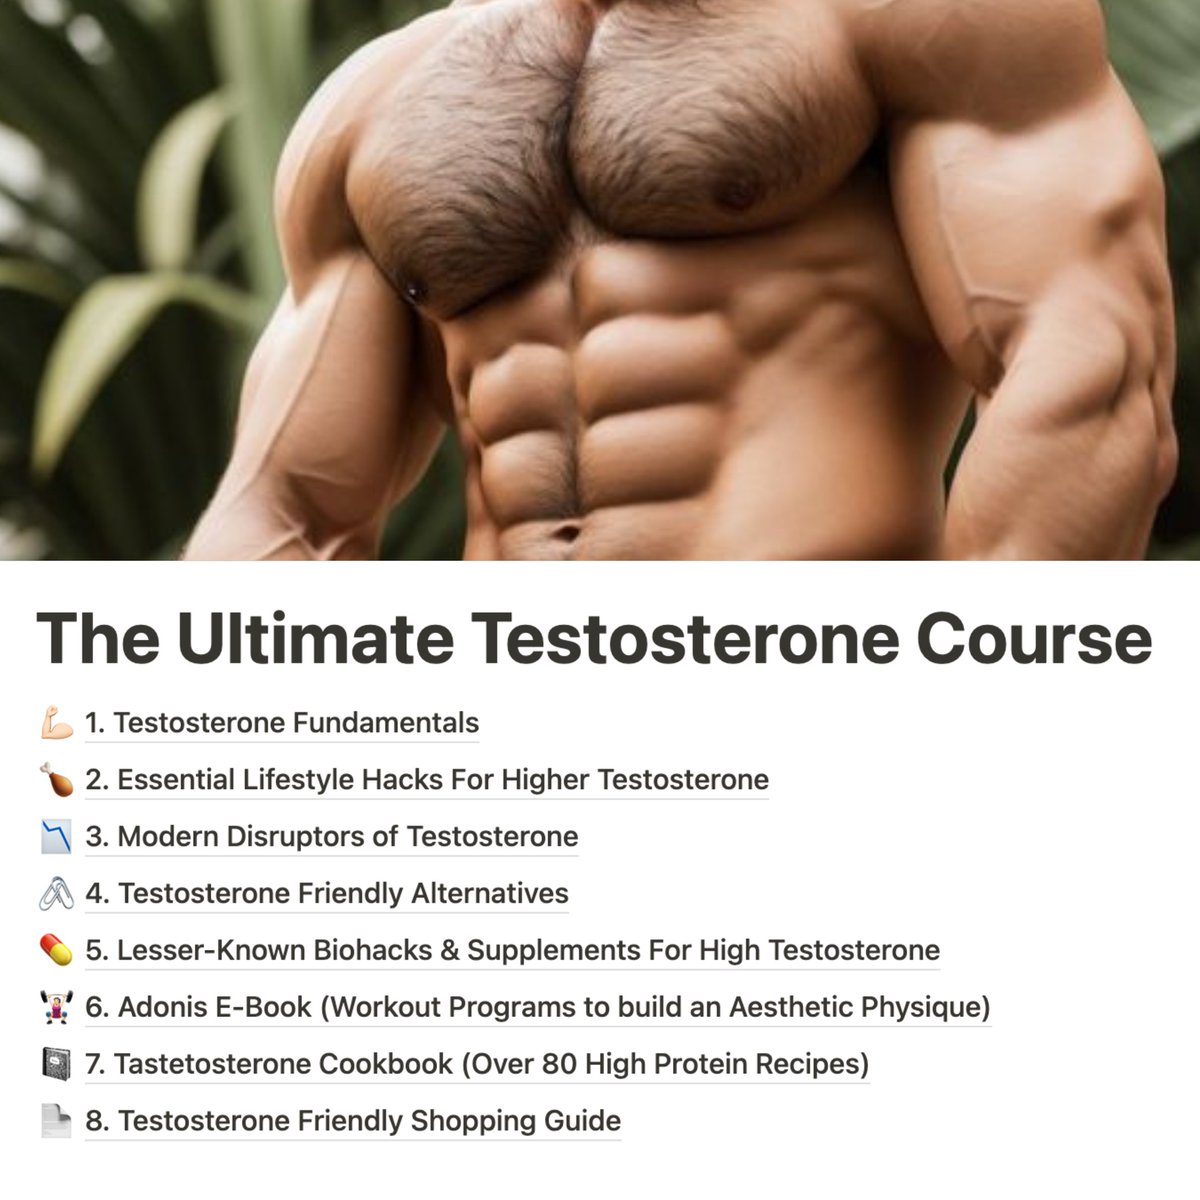 I've created the Ultimate Testosterone Course I usually only give this info to my paid clients... but for 24 hours, I'm giving it away for FREE, so you can: - Melt fat - Build muscle - Feel more Confident Like + Comment 'Send' and I'll DM it to you (must follow)